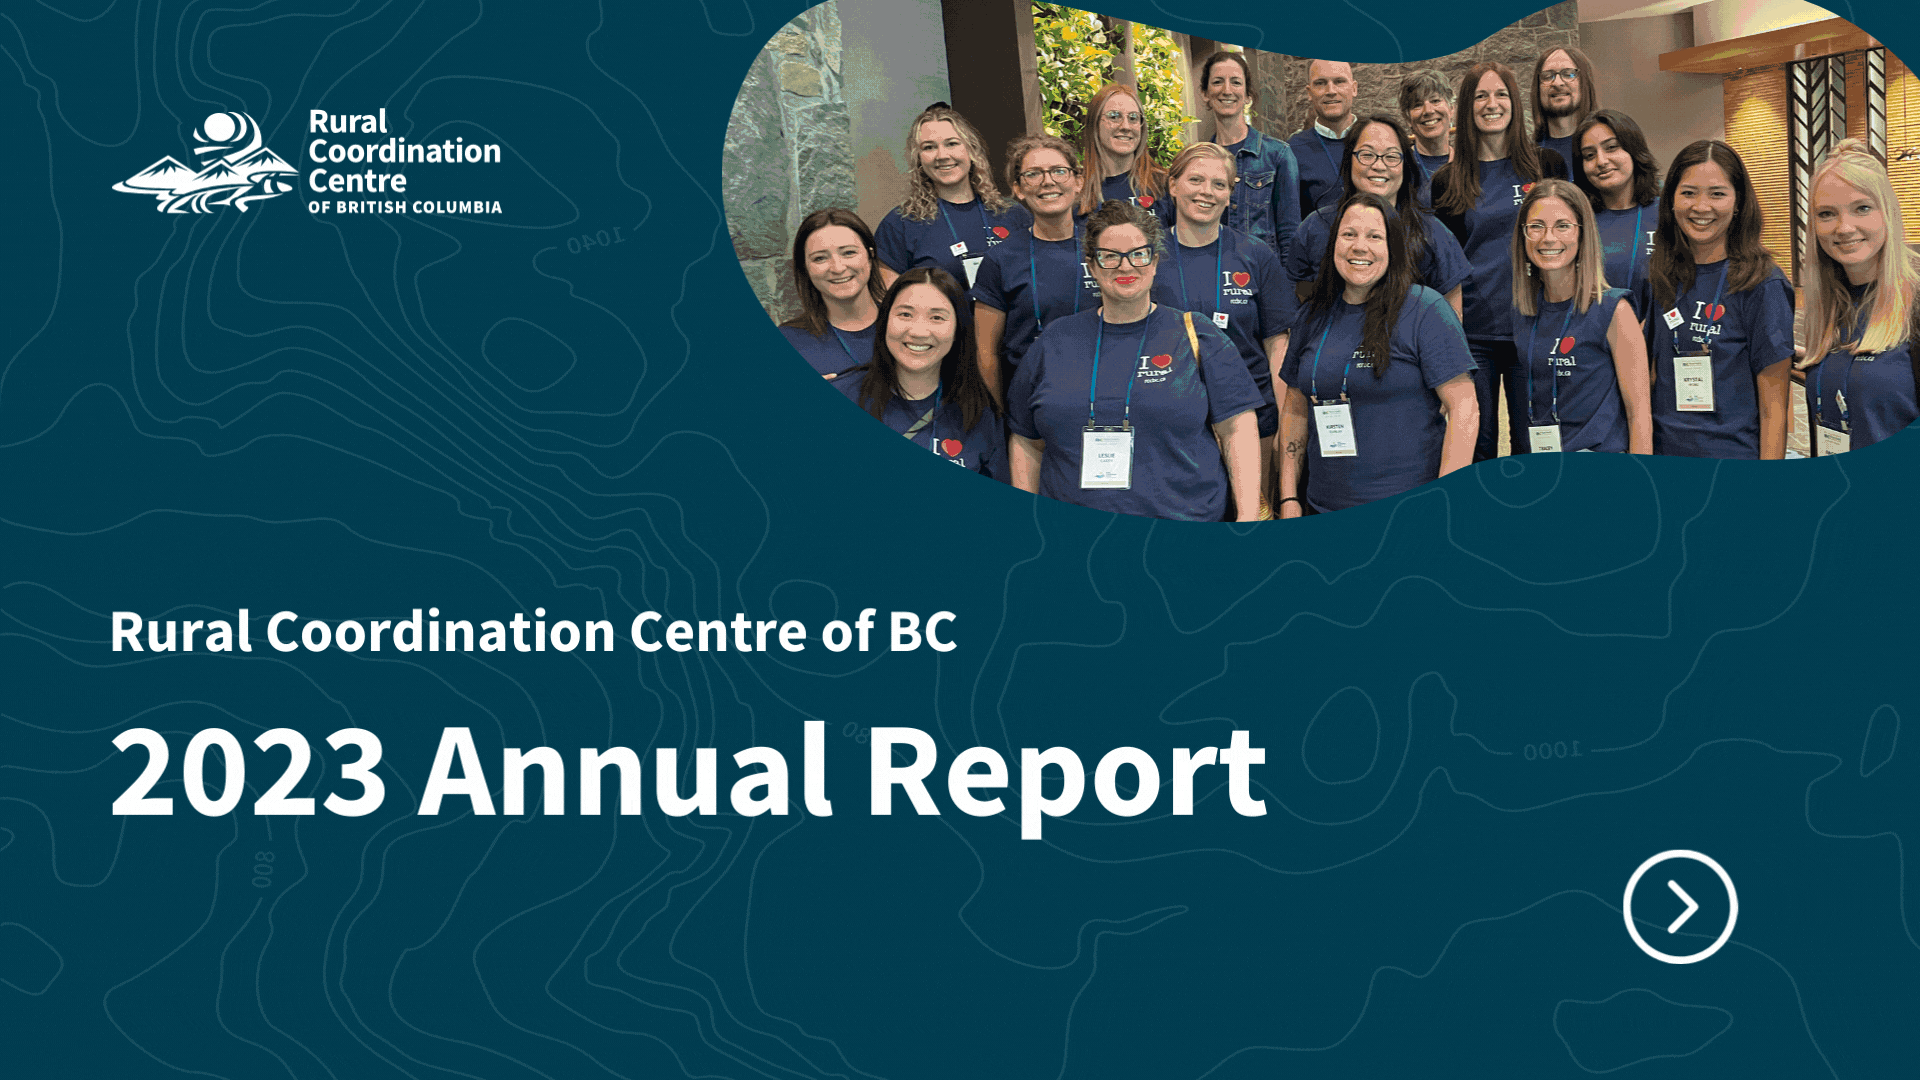 RCCbc 2023 Annual Report Infographic